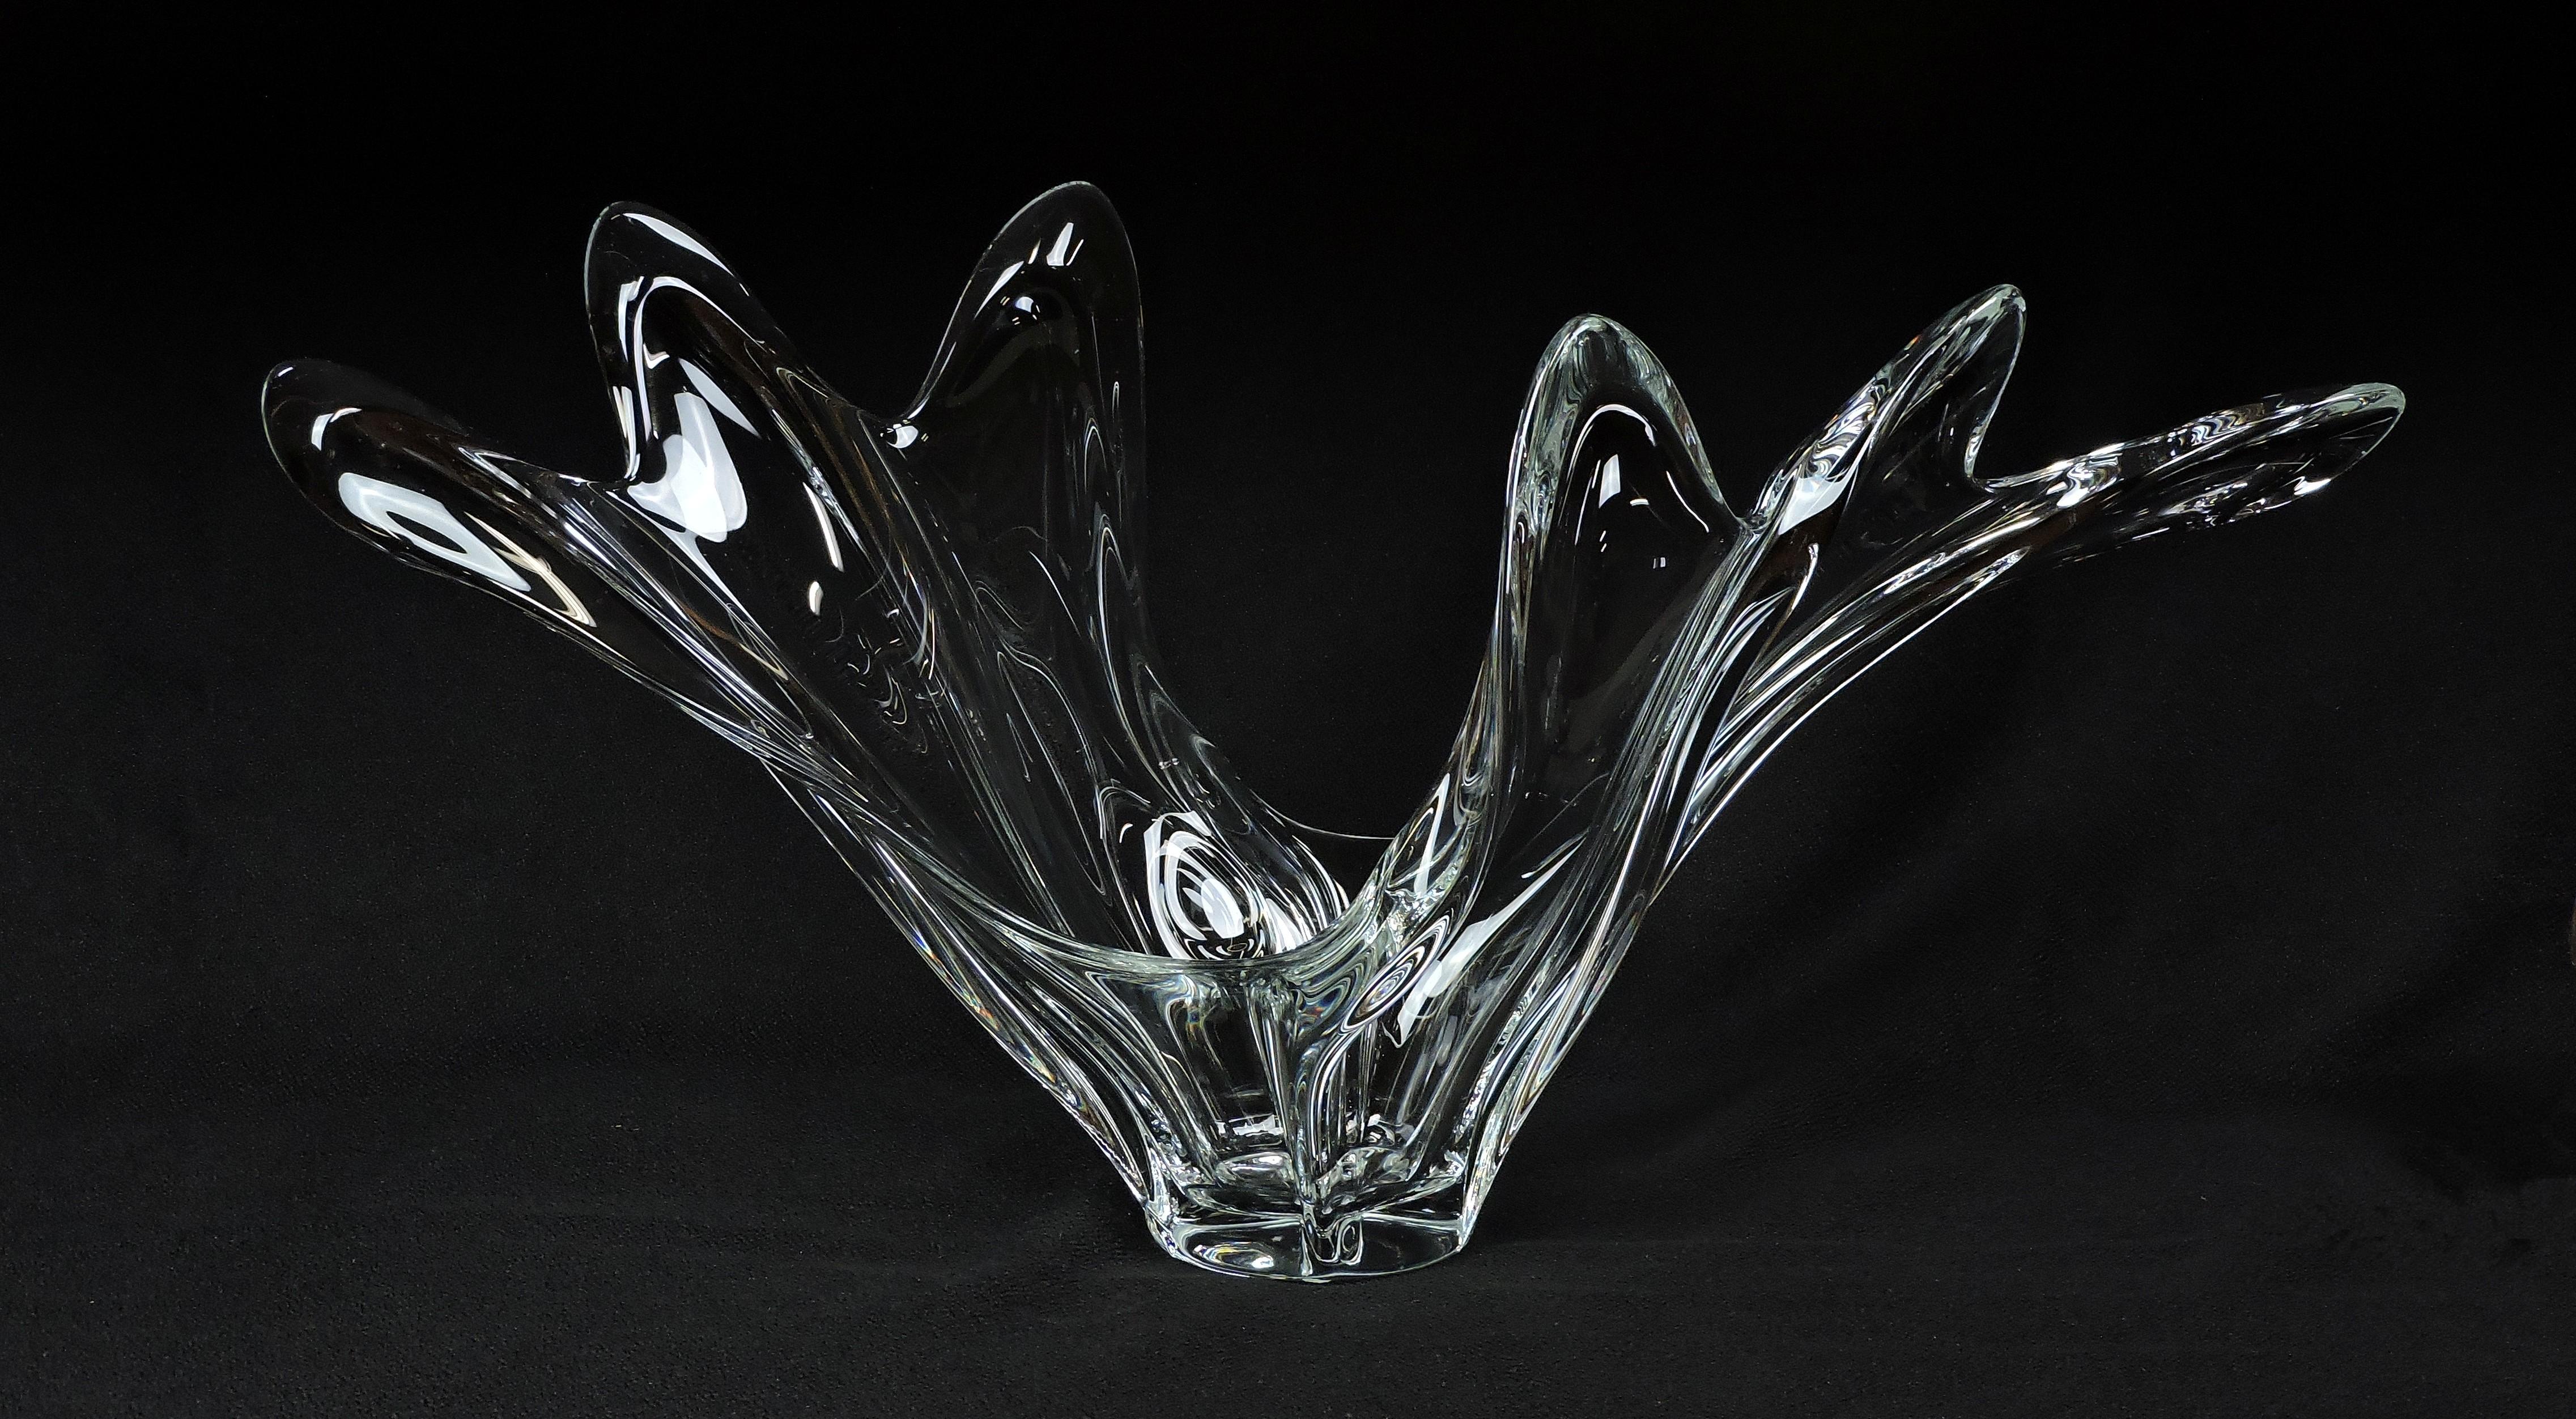 Impressive hand blown crystal bowl by Cofrac Art Verrier France. This large sized bowl has a fluid, freeform shape. Marked Cofrac, France on the bottom.